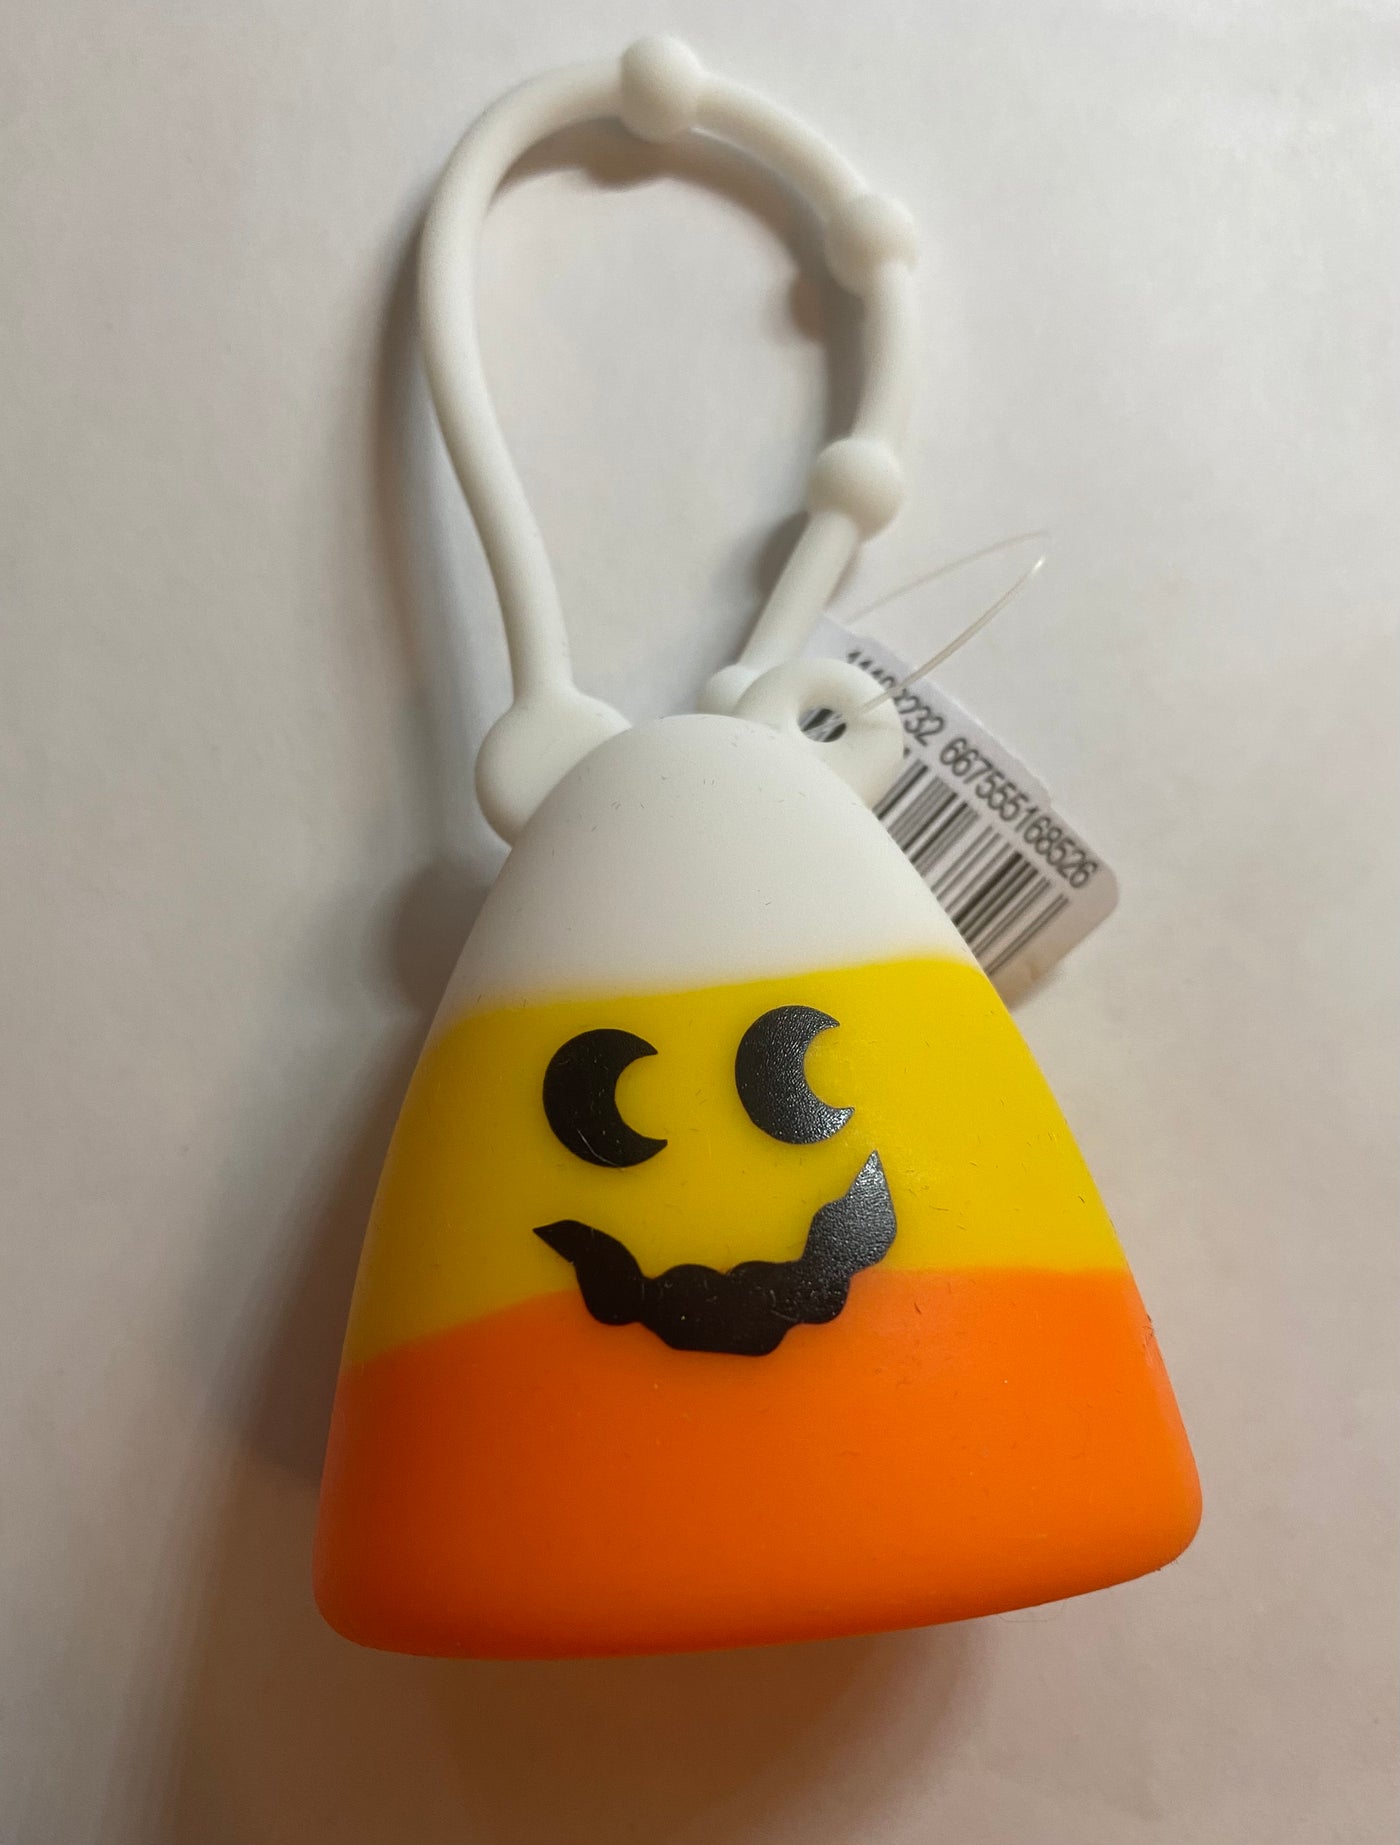 Bath and Body Works 2021 Halloween Candy Corn Pocketbac Holder New with Tag